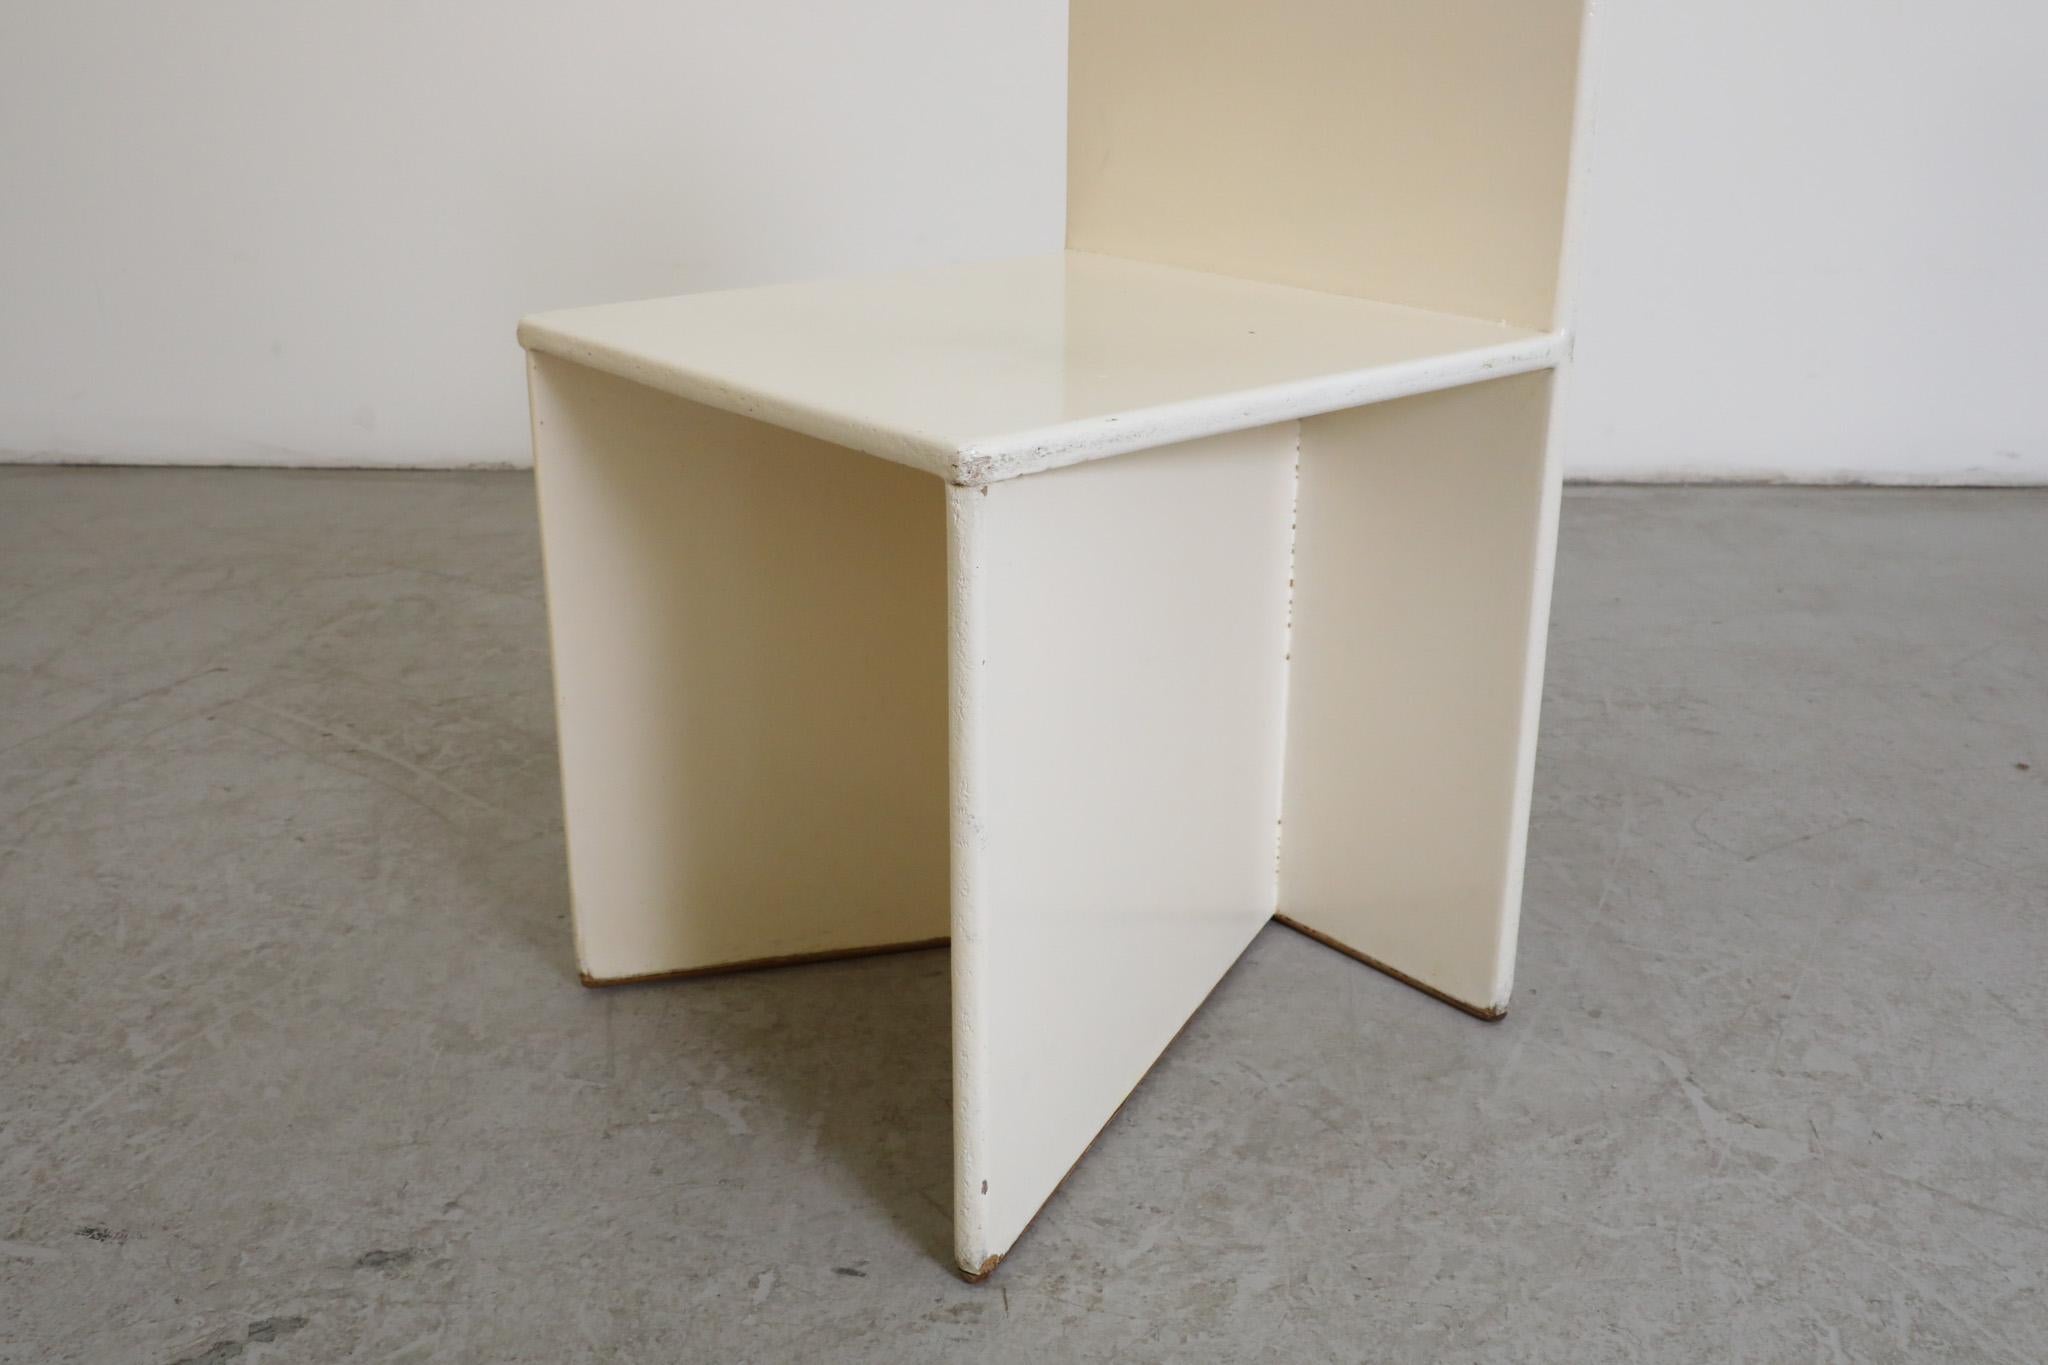 Pre War Gerrit Rietveld Style Modernist Painted Chair For Sale 5